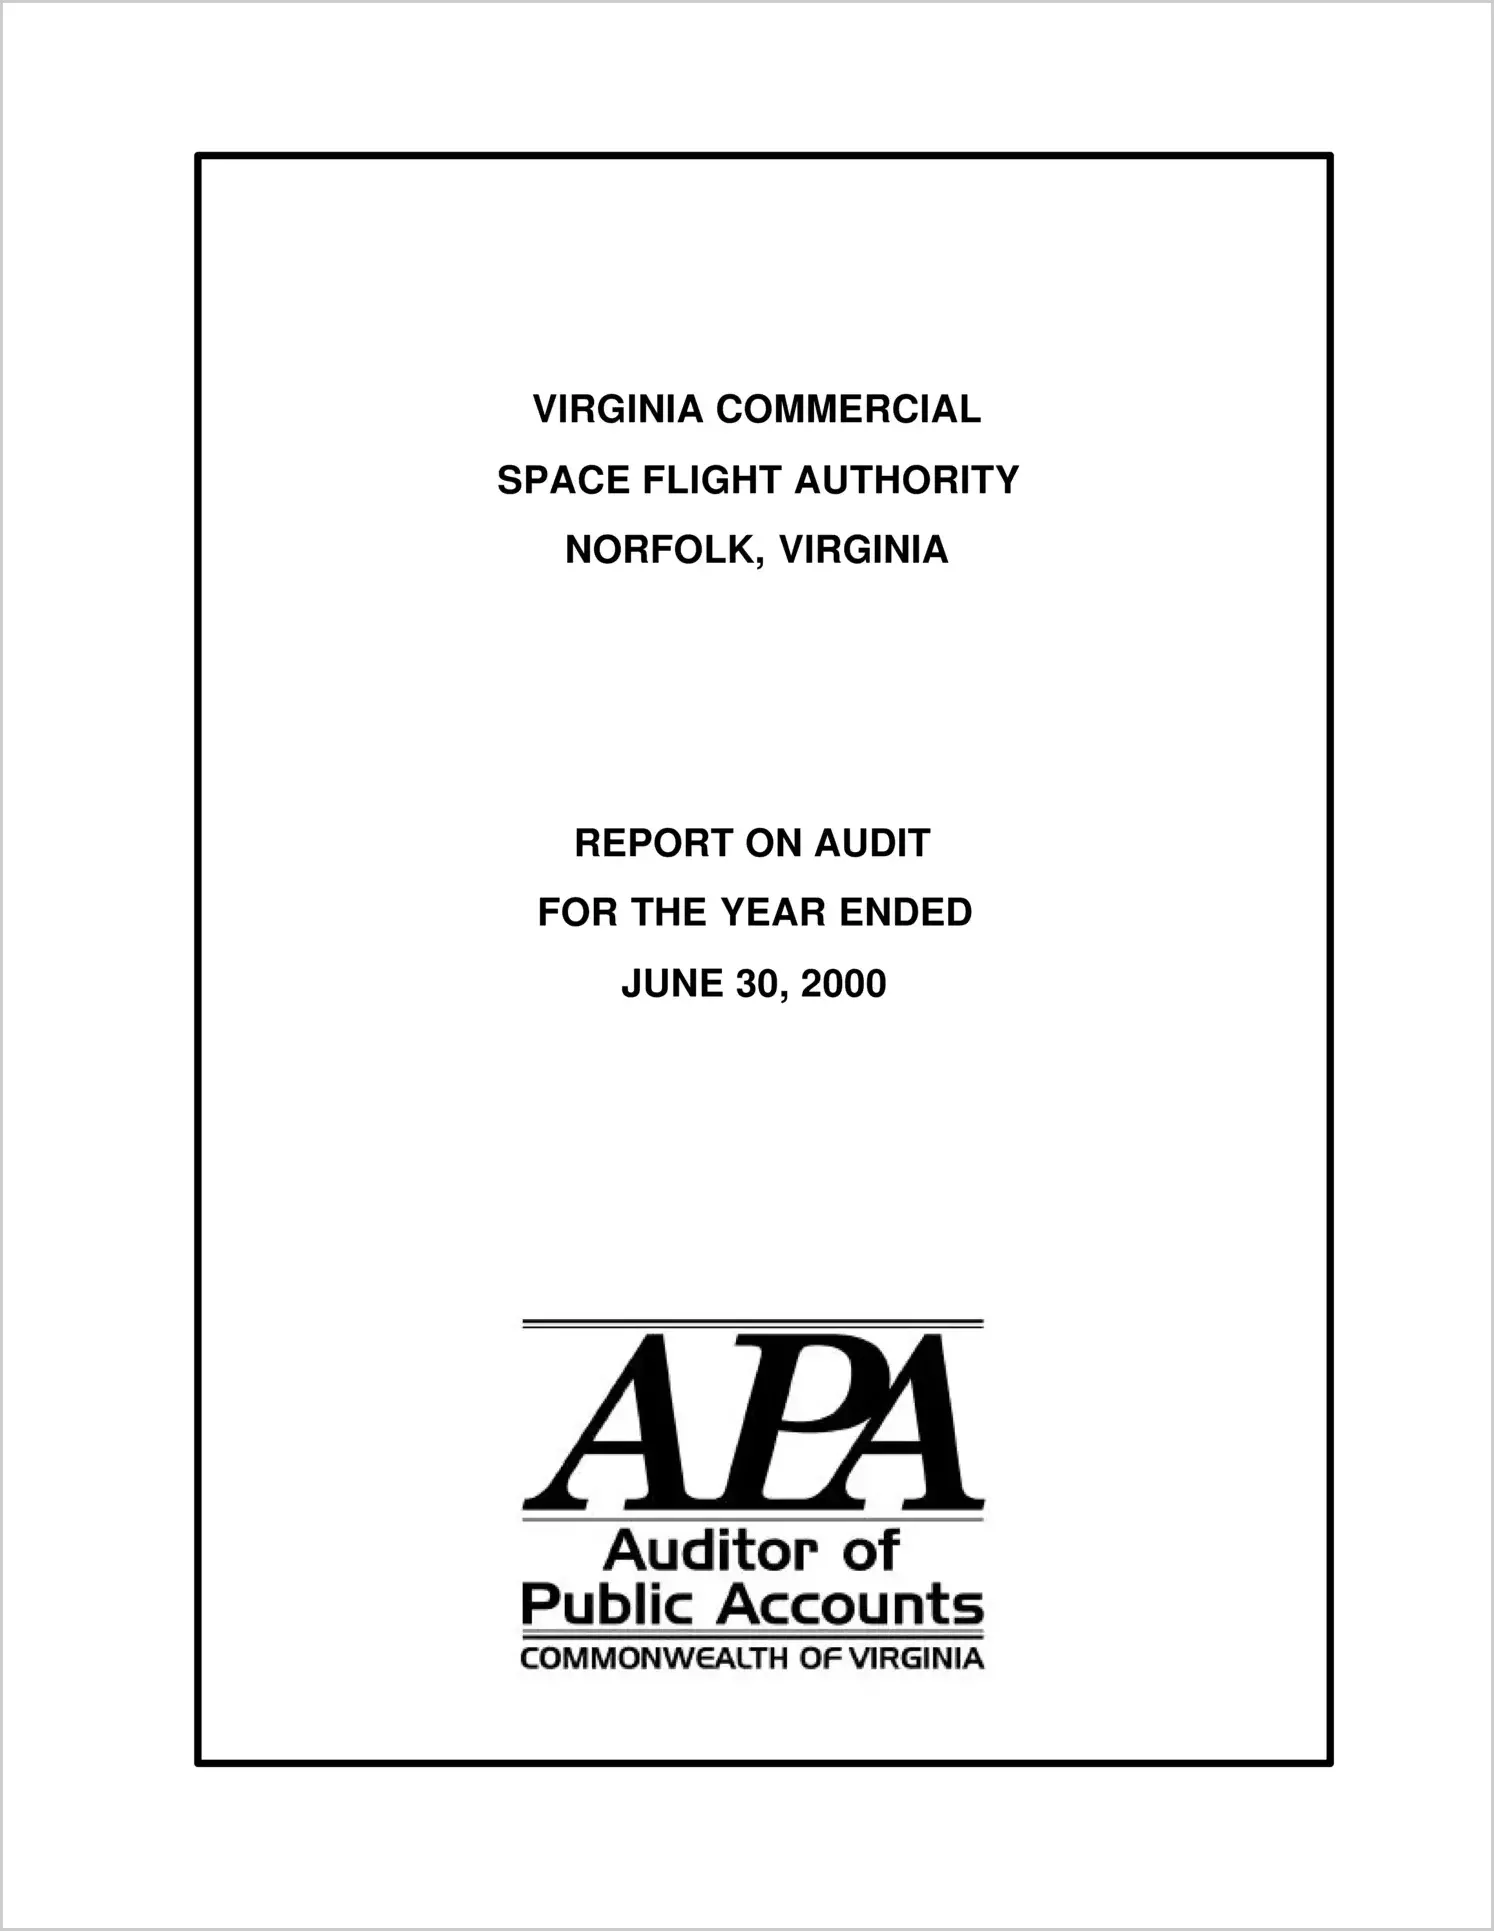 Virginia Commercial Space Flight Authority for the year ended June 30, 2000